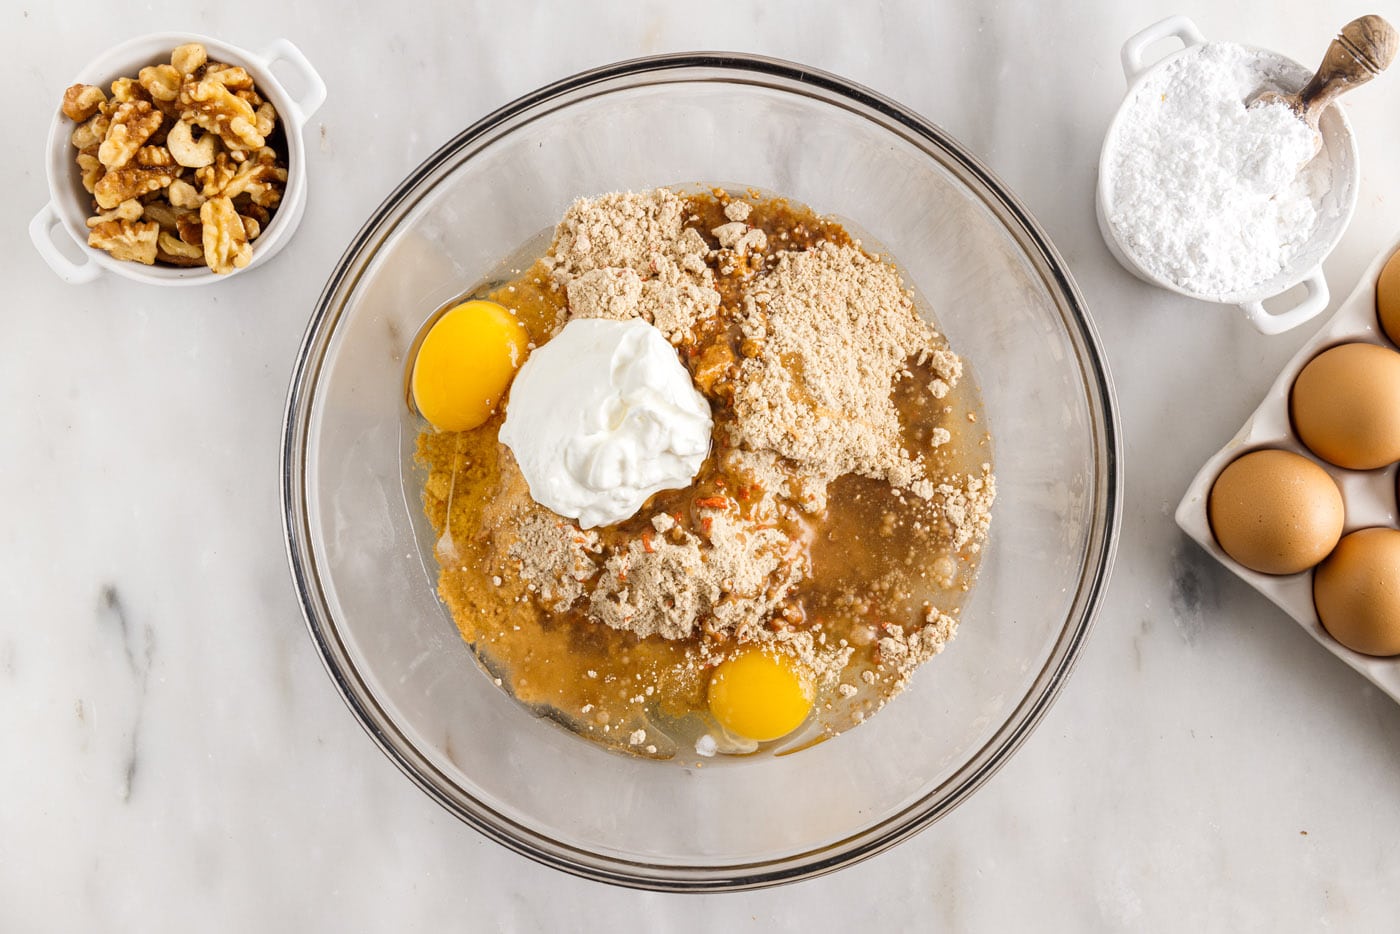 eggs, oil, carrot cake mix, and sour cream in a mixing bowl